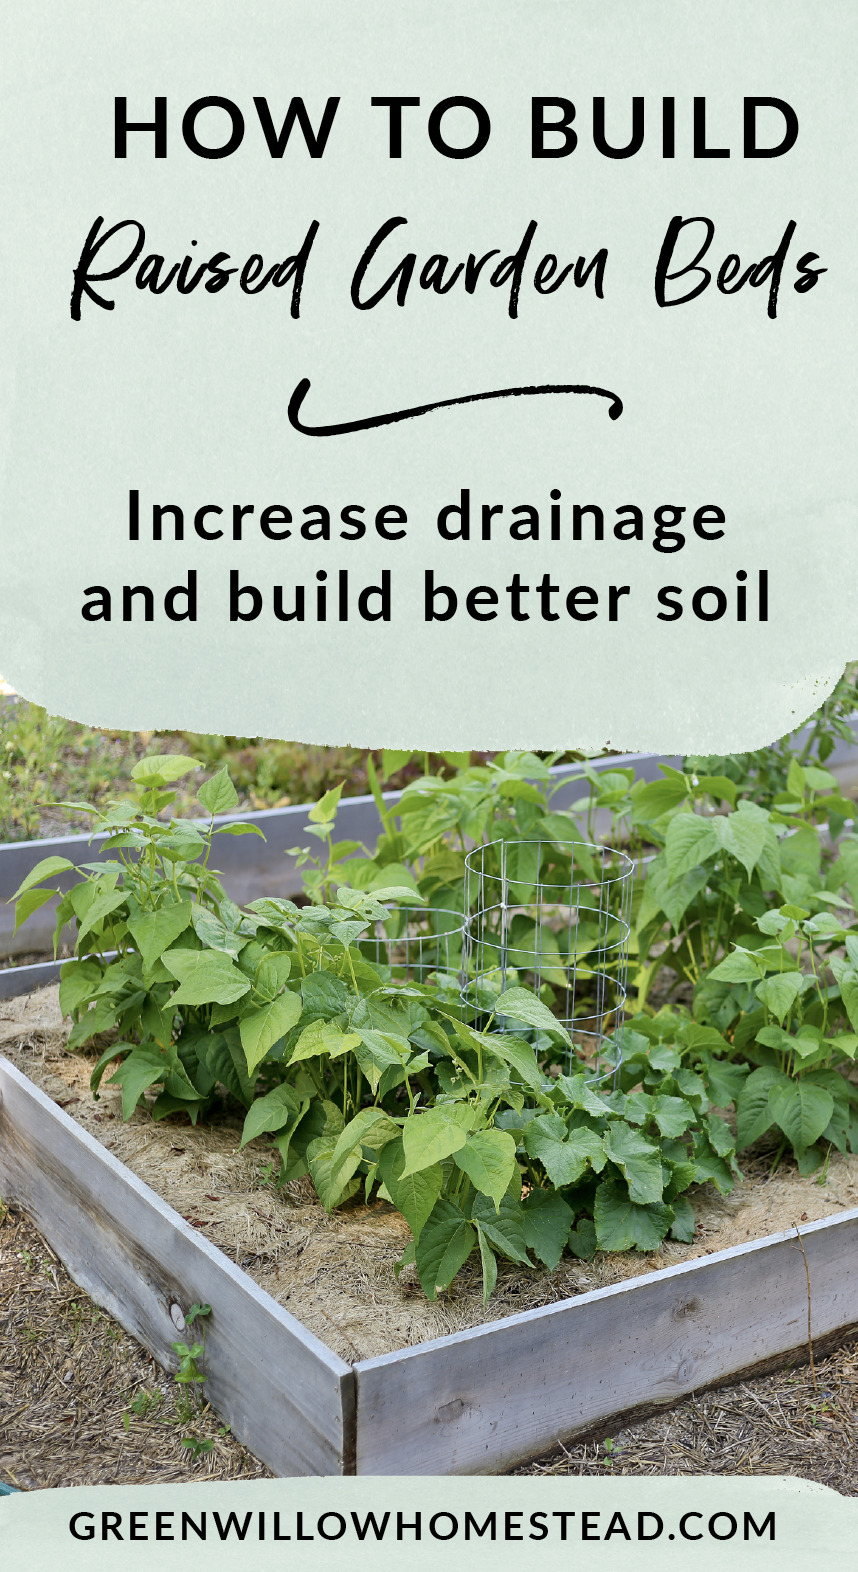 How to build raised garden beds on the cheap and increase drainage and build better soil